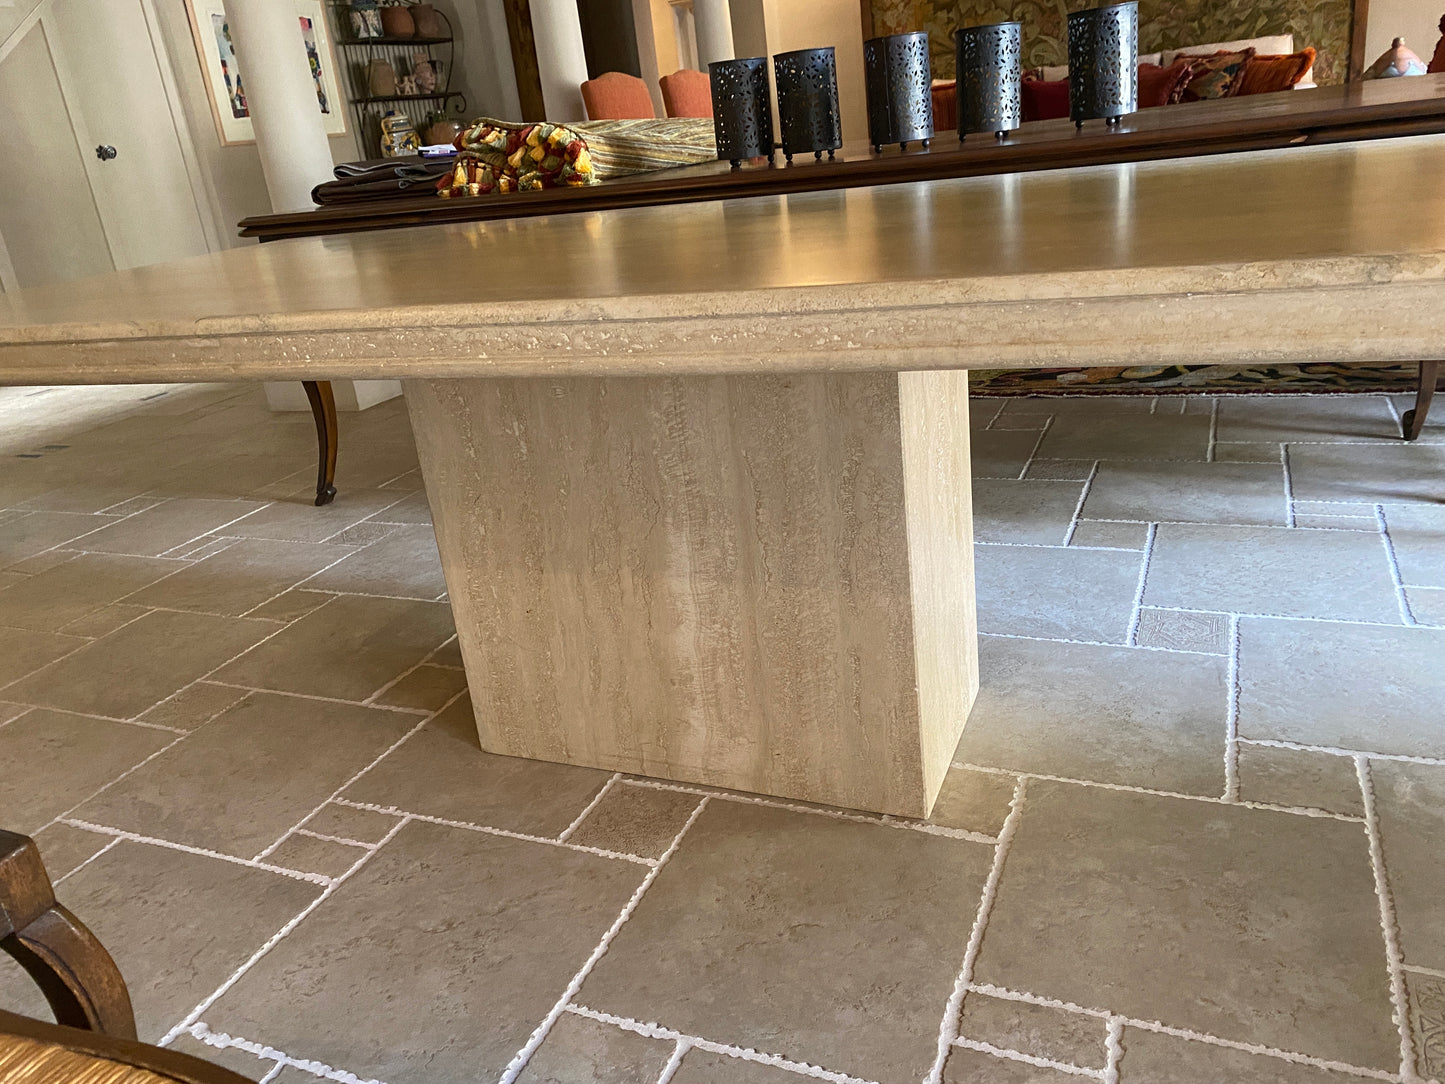 - Polished Travertine Dining Table